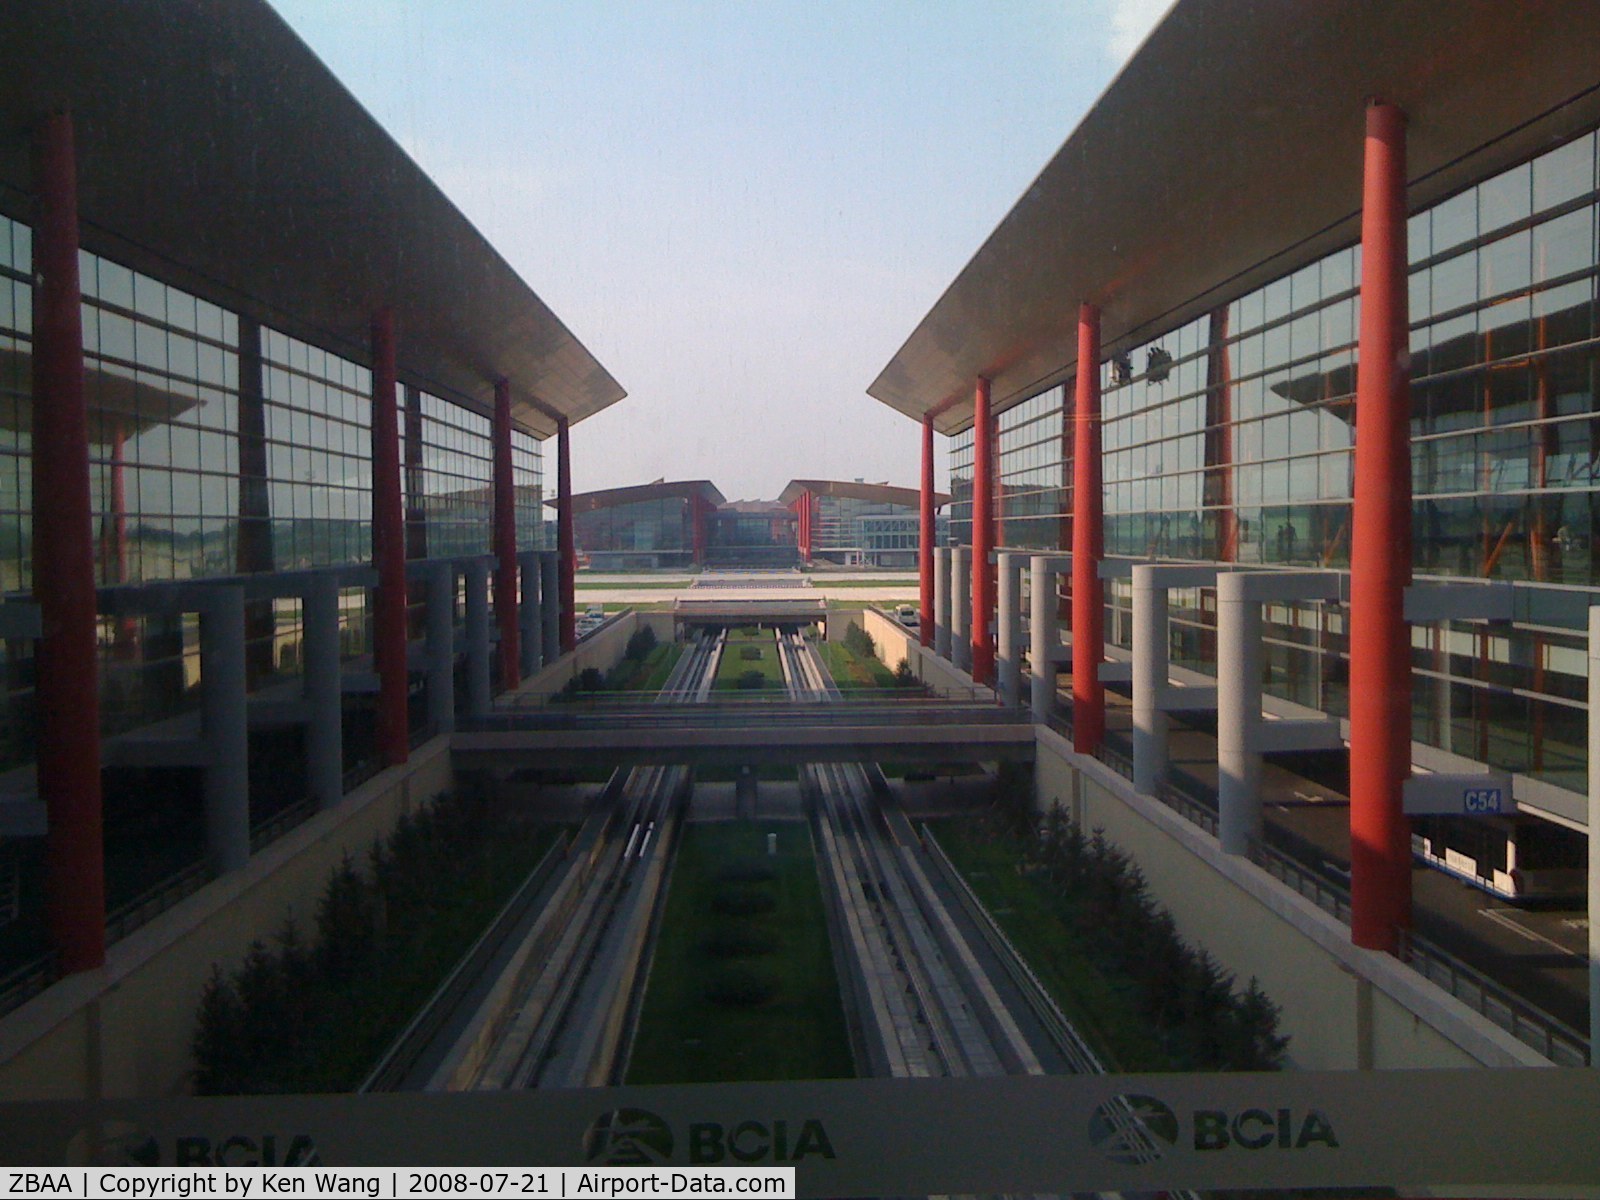 Beijing Capital International Airport, Beijing China (ZBAA) - Monorail which connects two separate buildings of Terminal 3